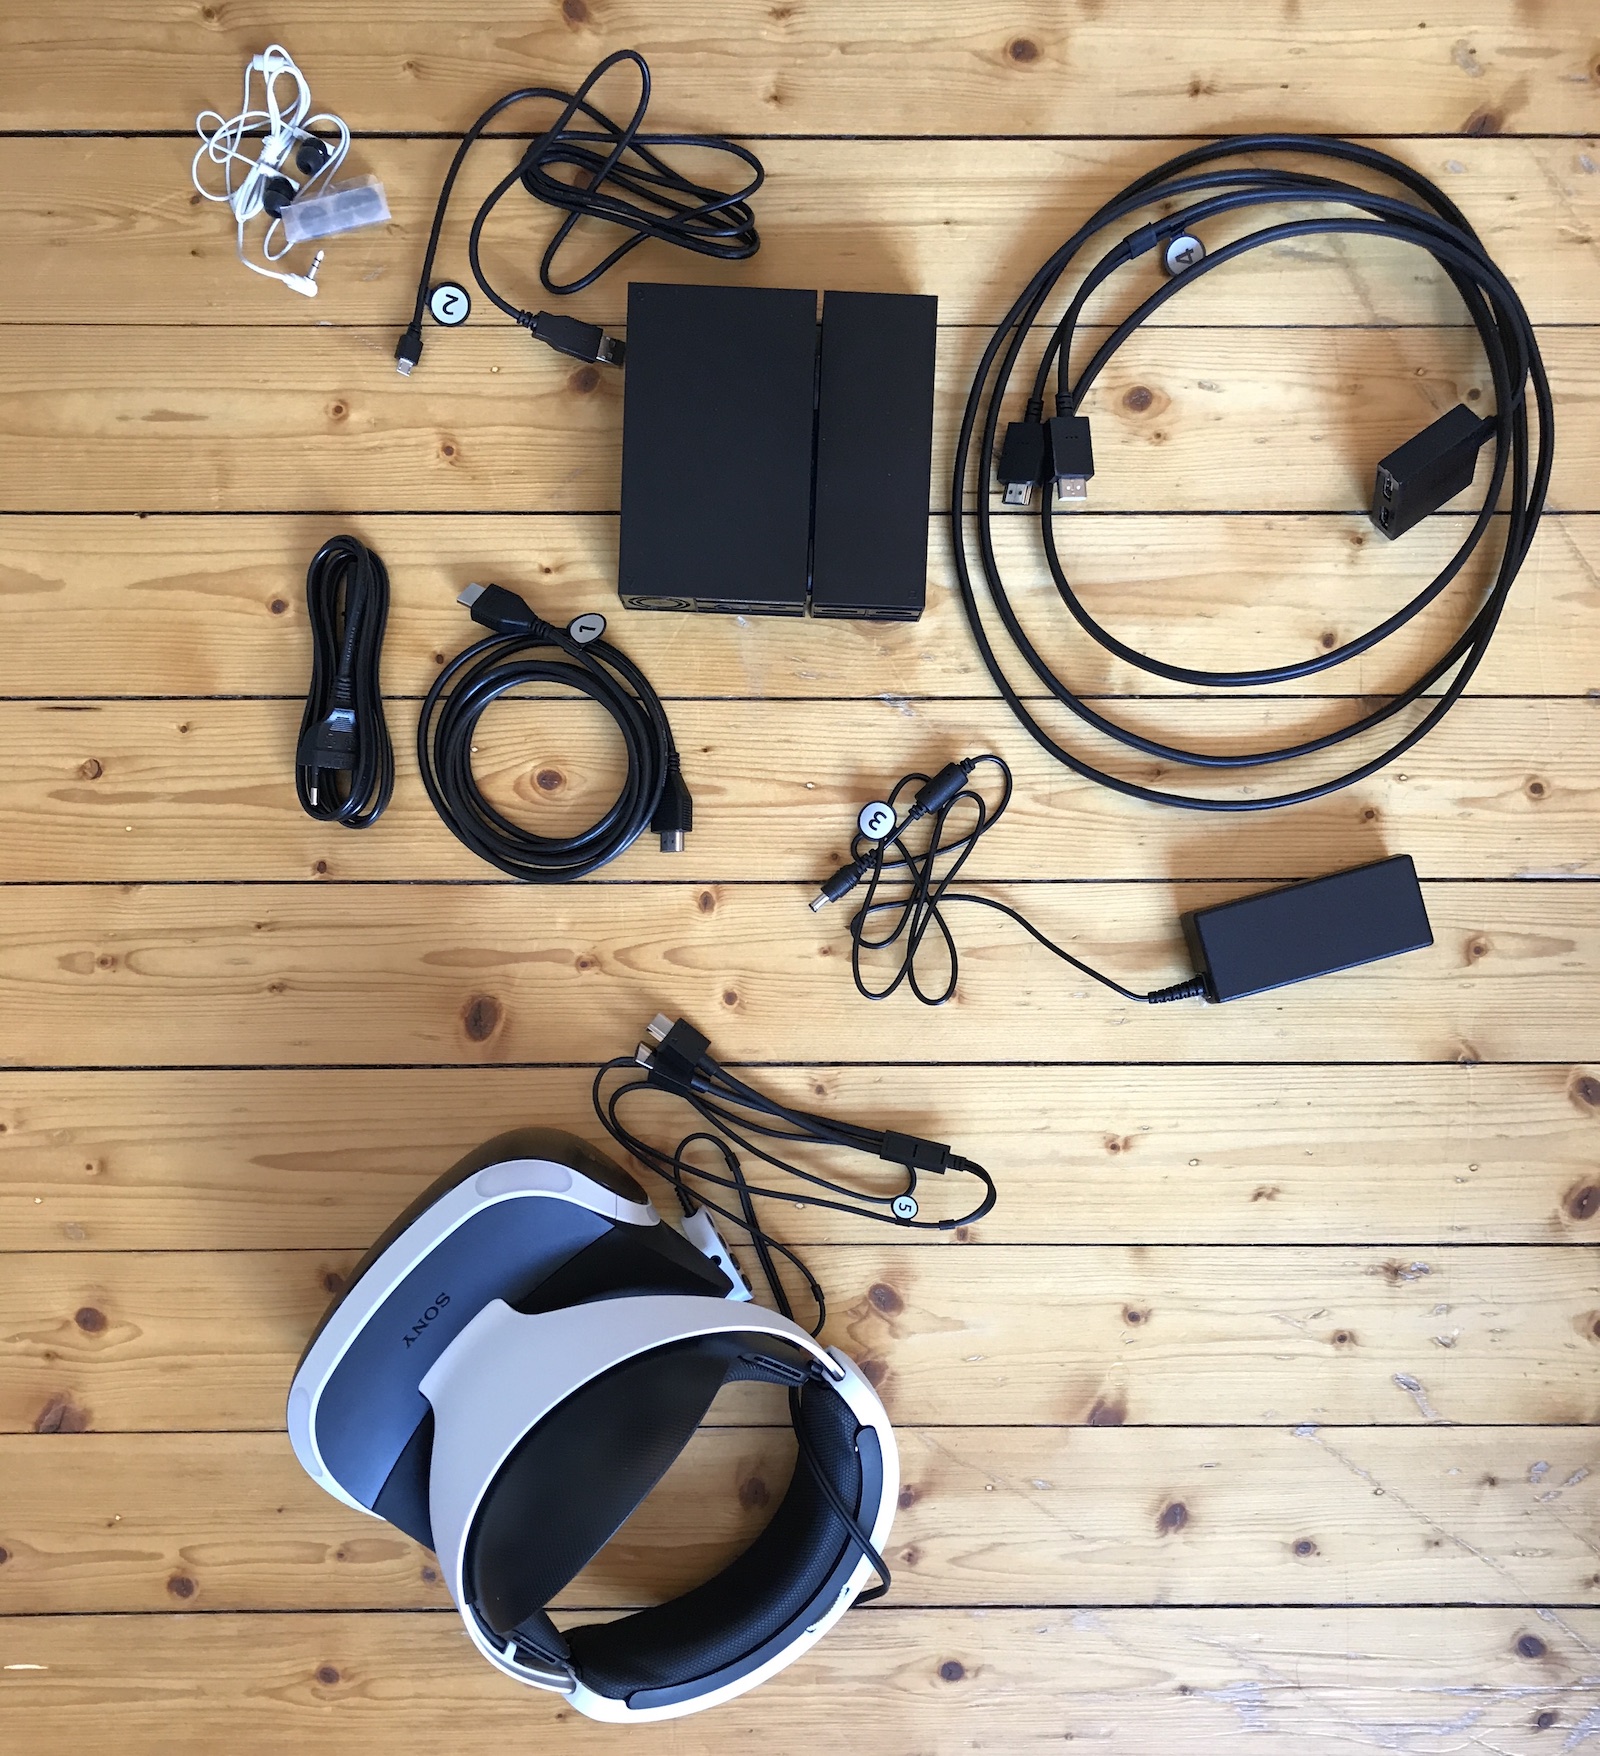 Playstation VR with full cable complement